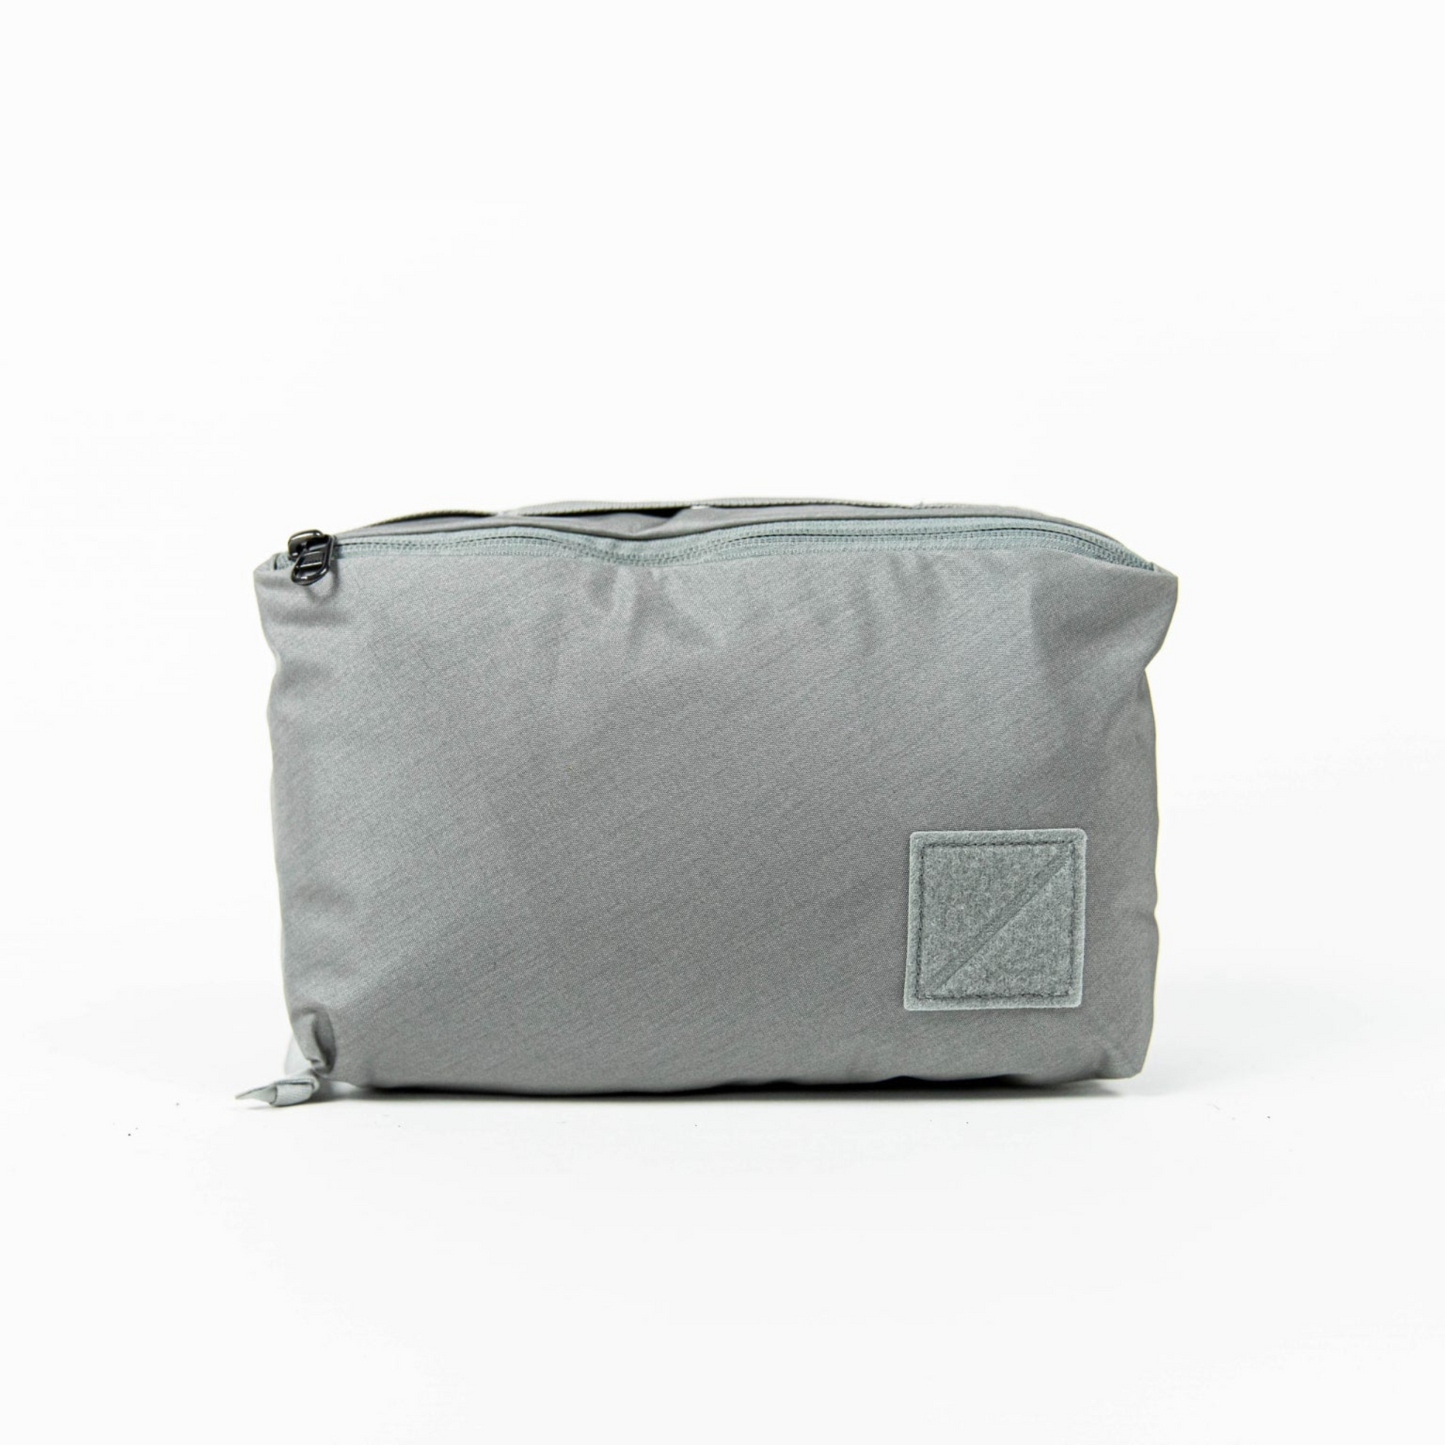 Evergoods - Transit Packing Cube 8L